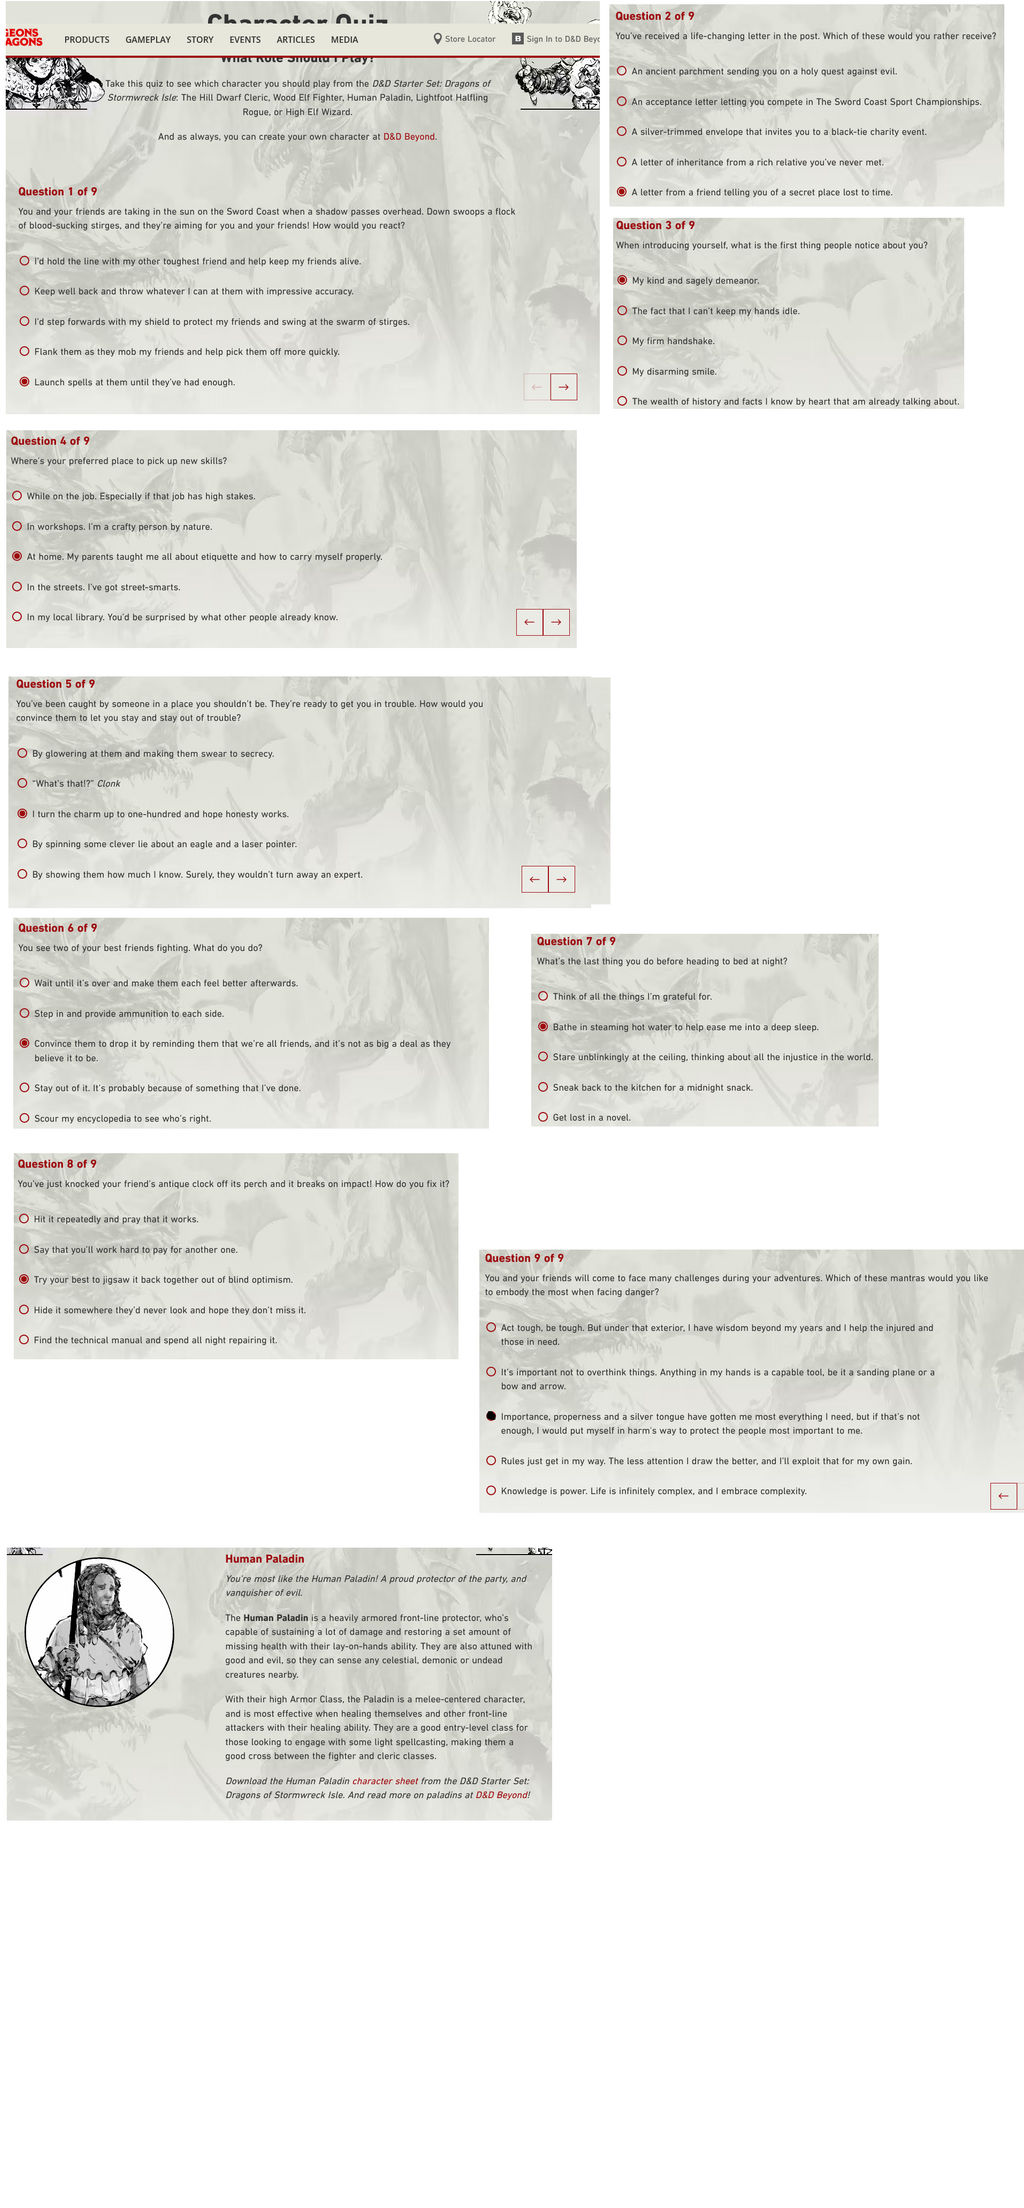 dnd_questions__just_for_fun__by_akarifan25_dgn8myy-fullview.jpg